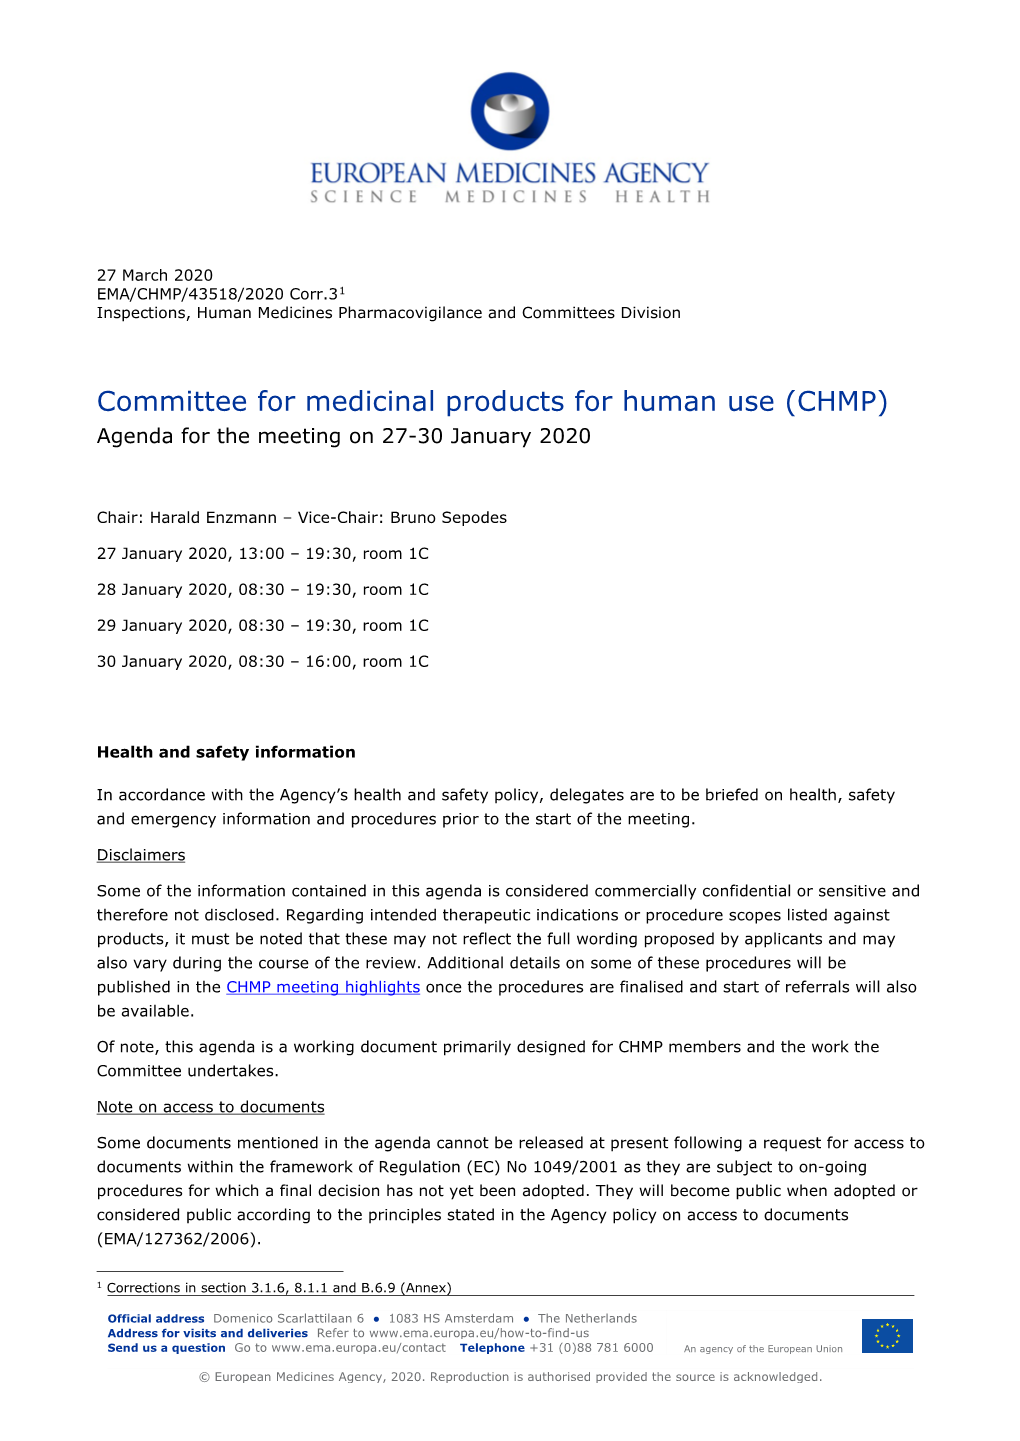 (CHMP) Agenda for the Meeting on 27-30 January 2020